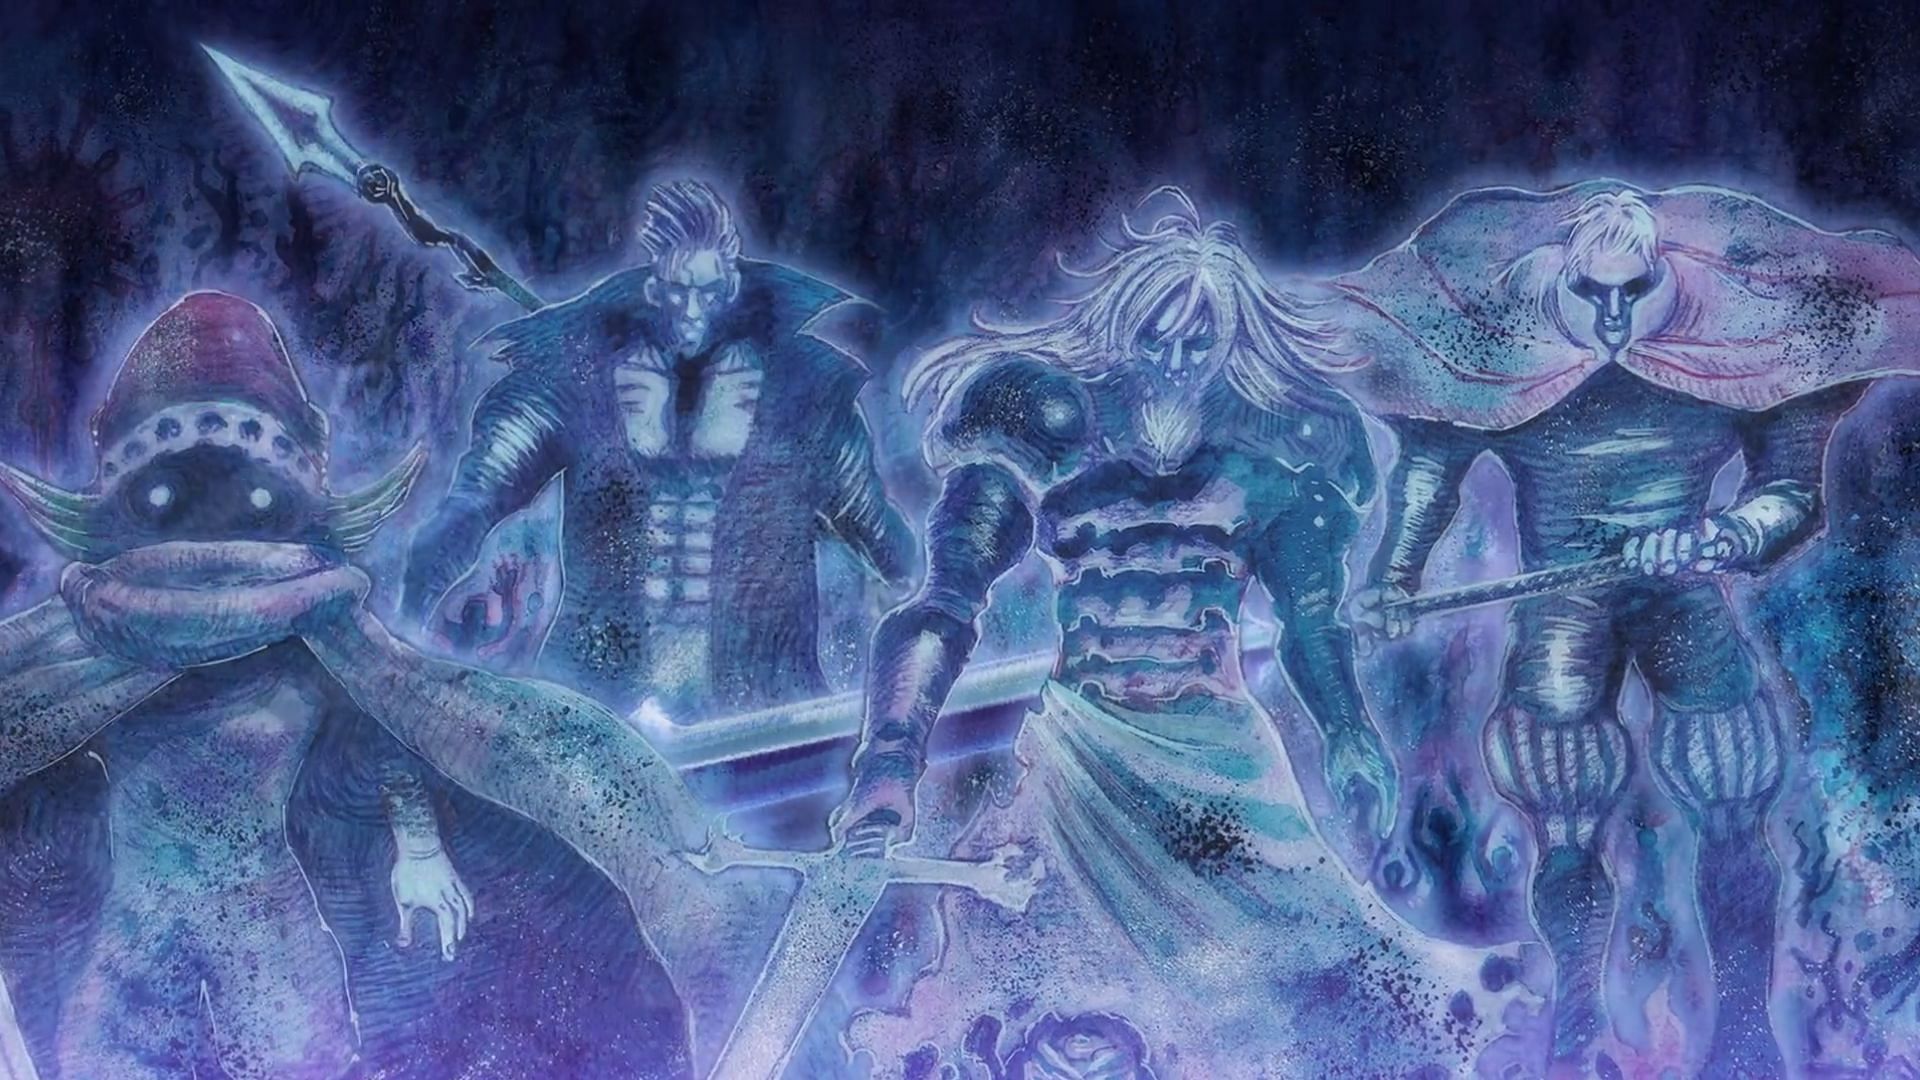 Four Knights of the Apocalypse as depicted in the teaser trailer (Image via Telecom Animation Film)